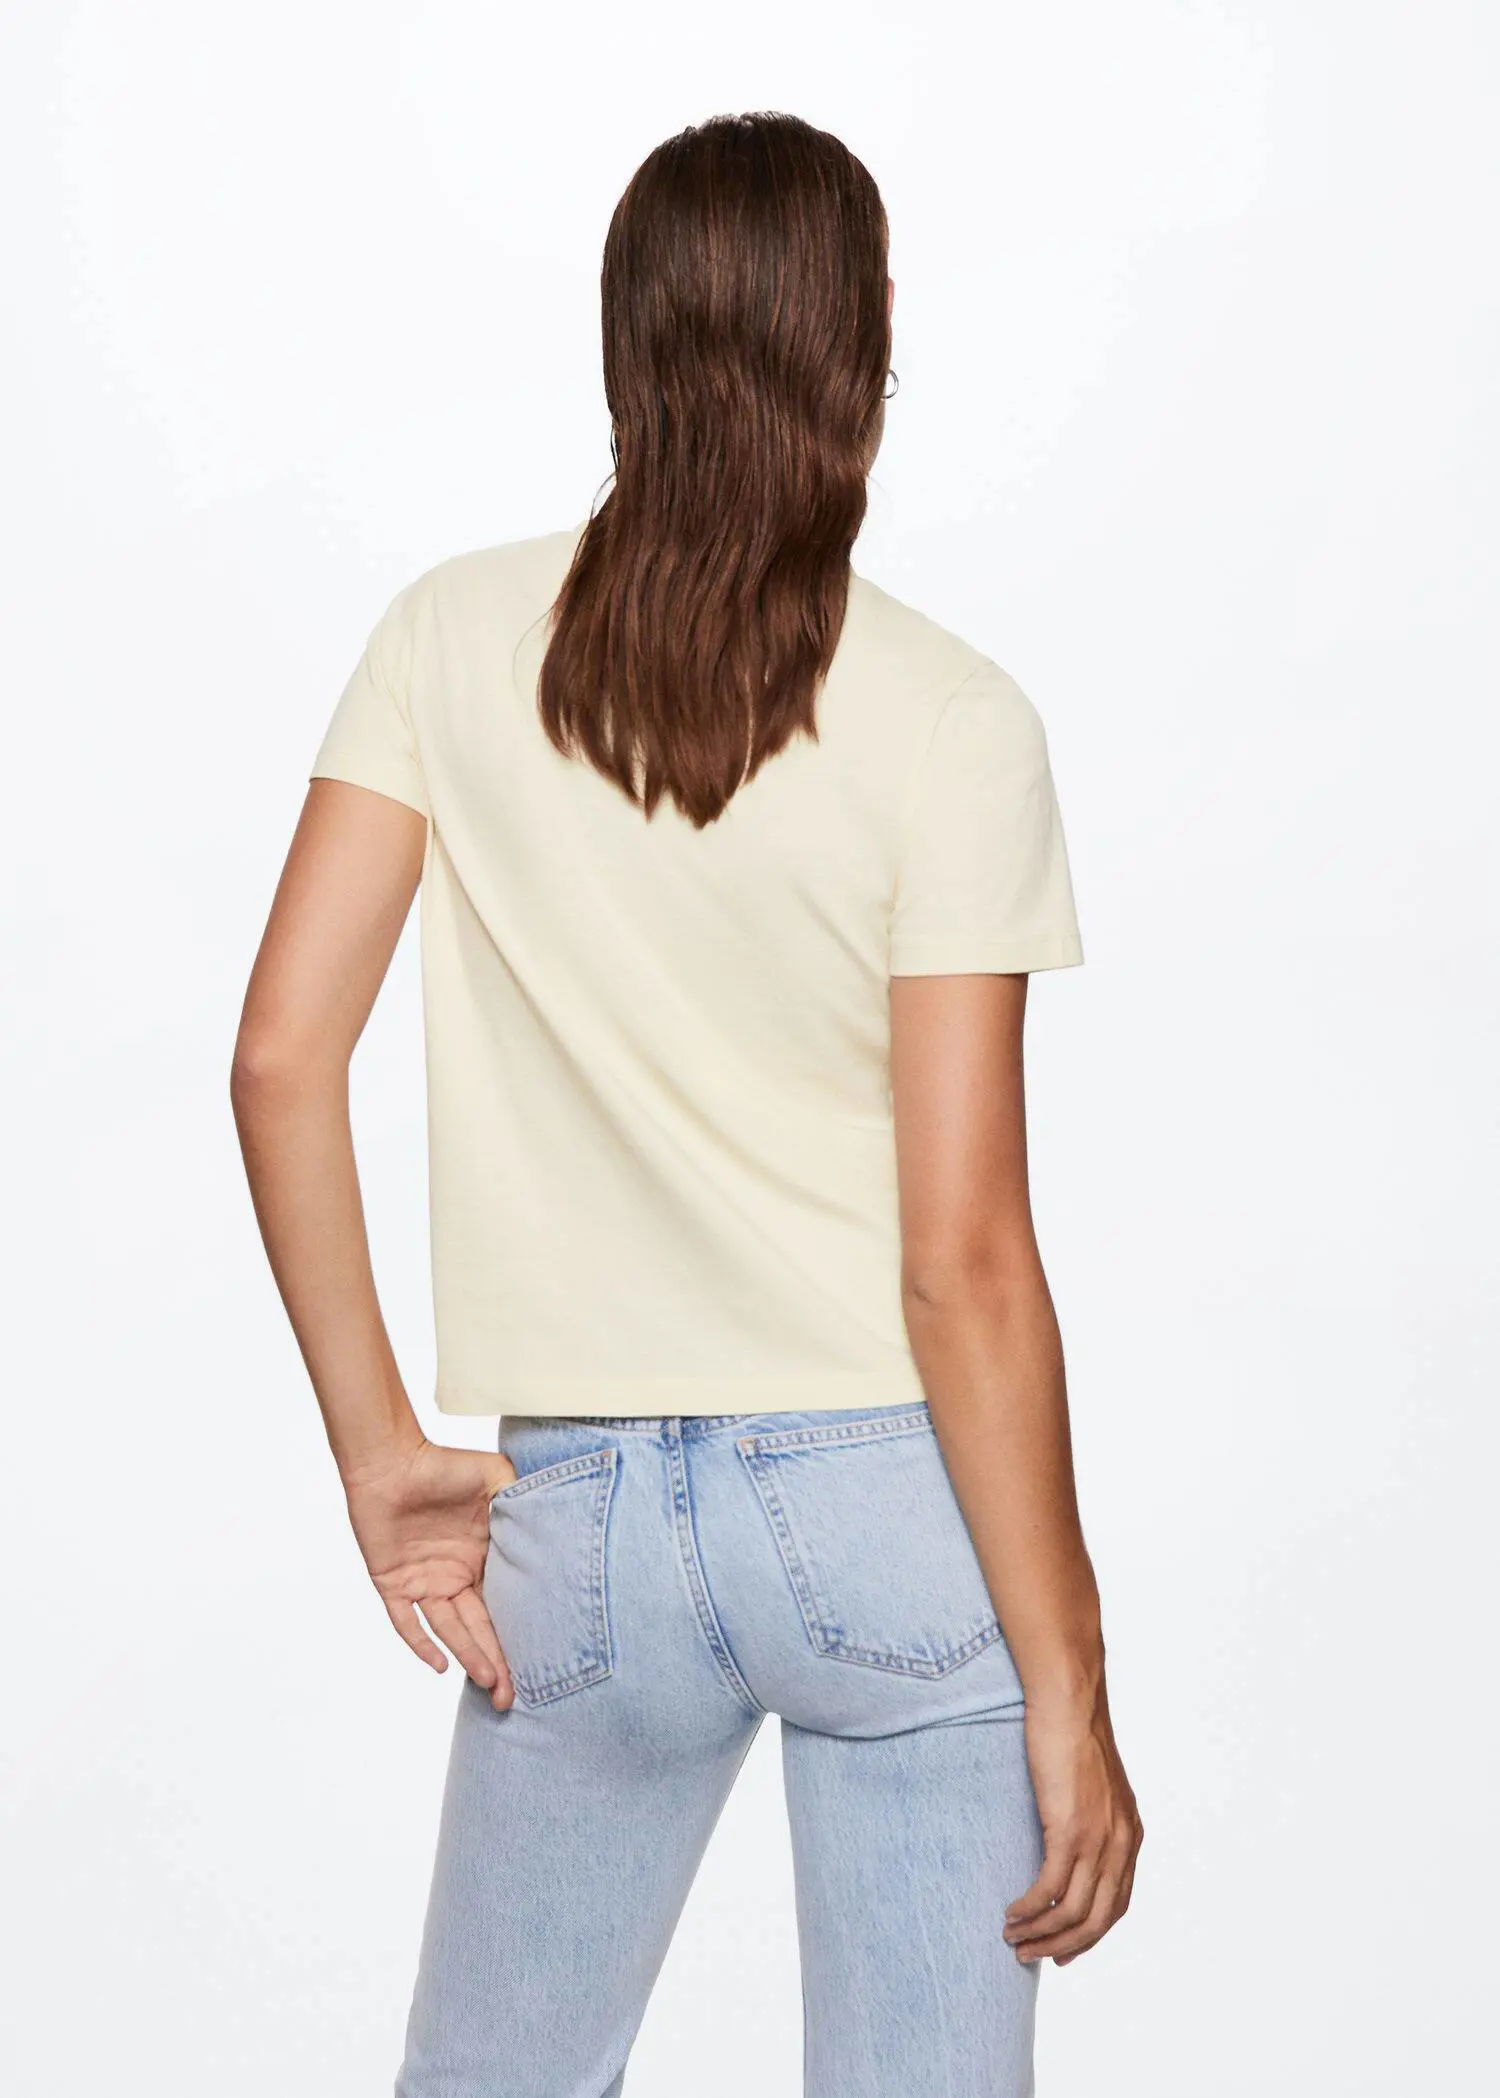 Mango Printed message T-shirt. a woman in a white shirt and blue jeans. 